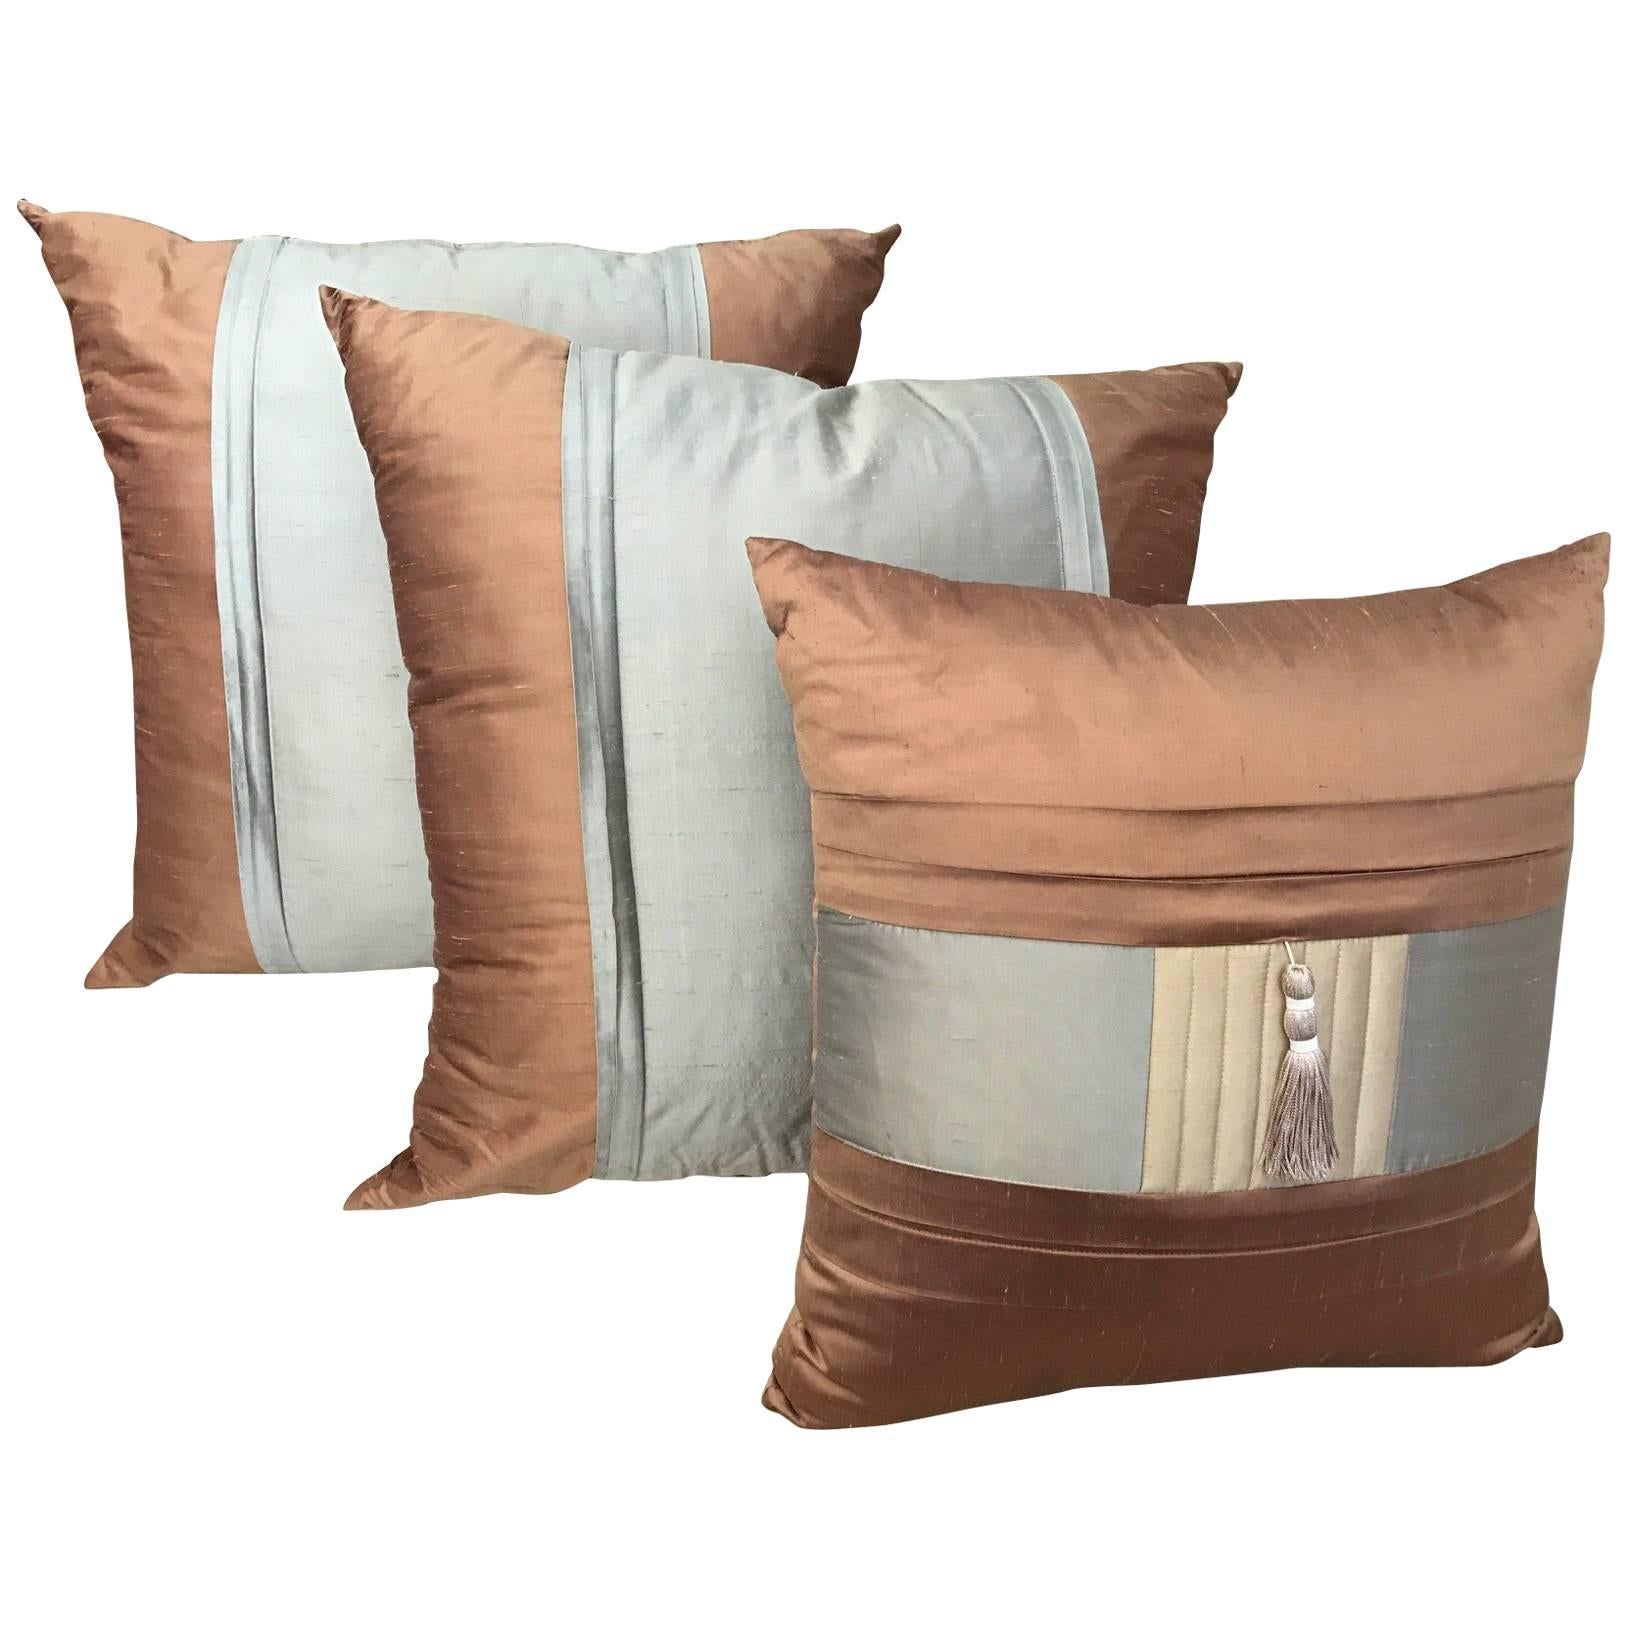 SALE Three Lee Jofa Silk Pillows Sandstone Brown, Graphite and Indian River Taup For Sale